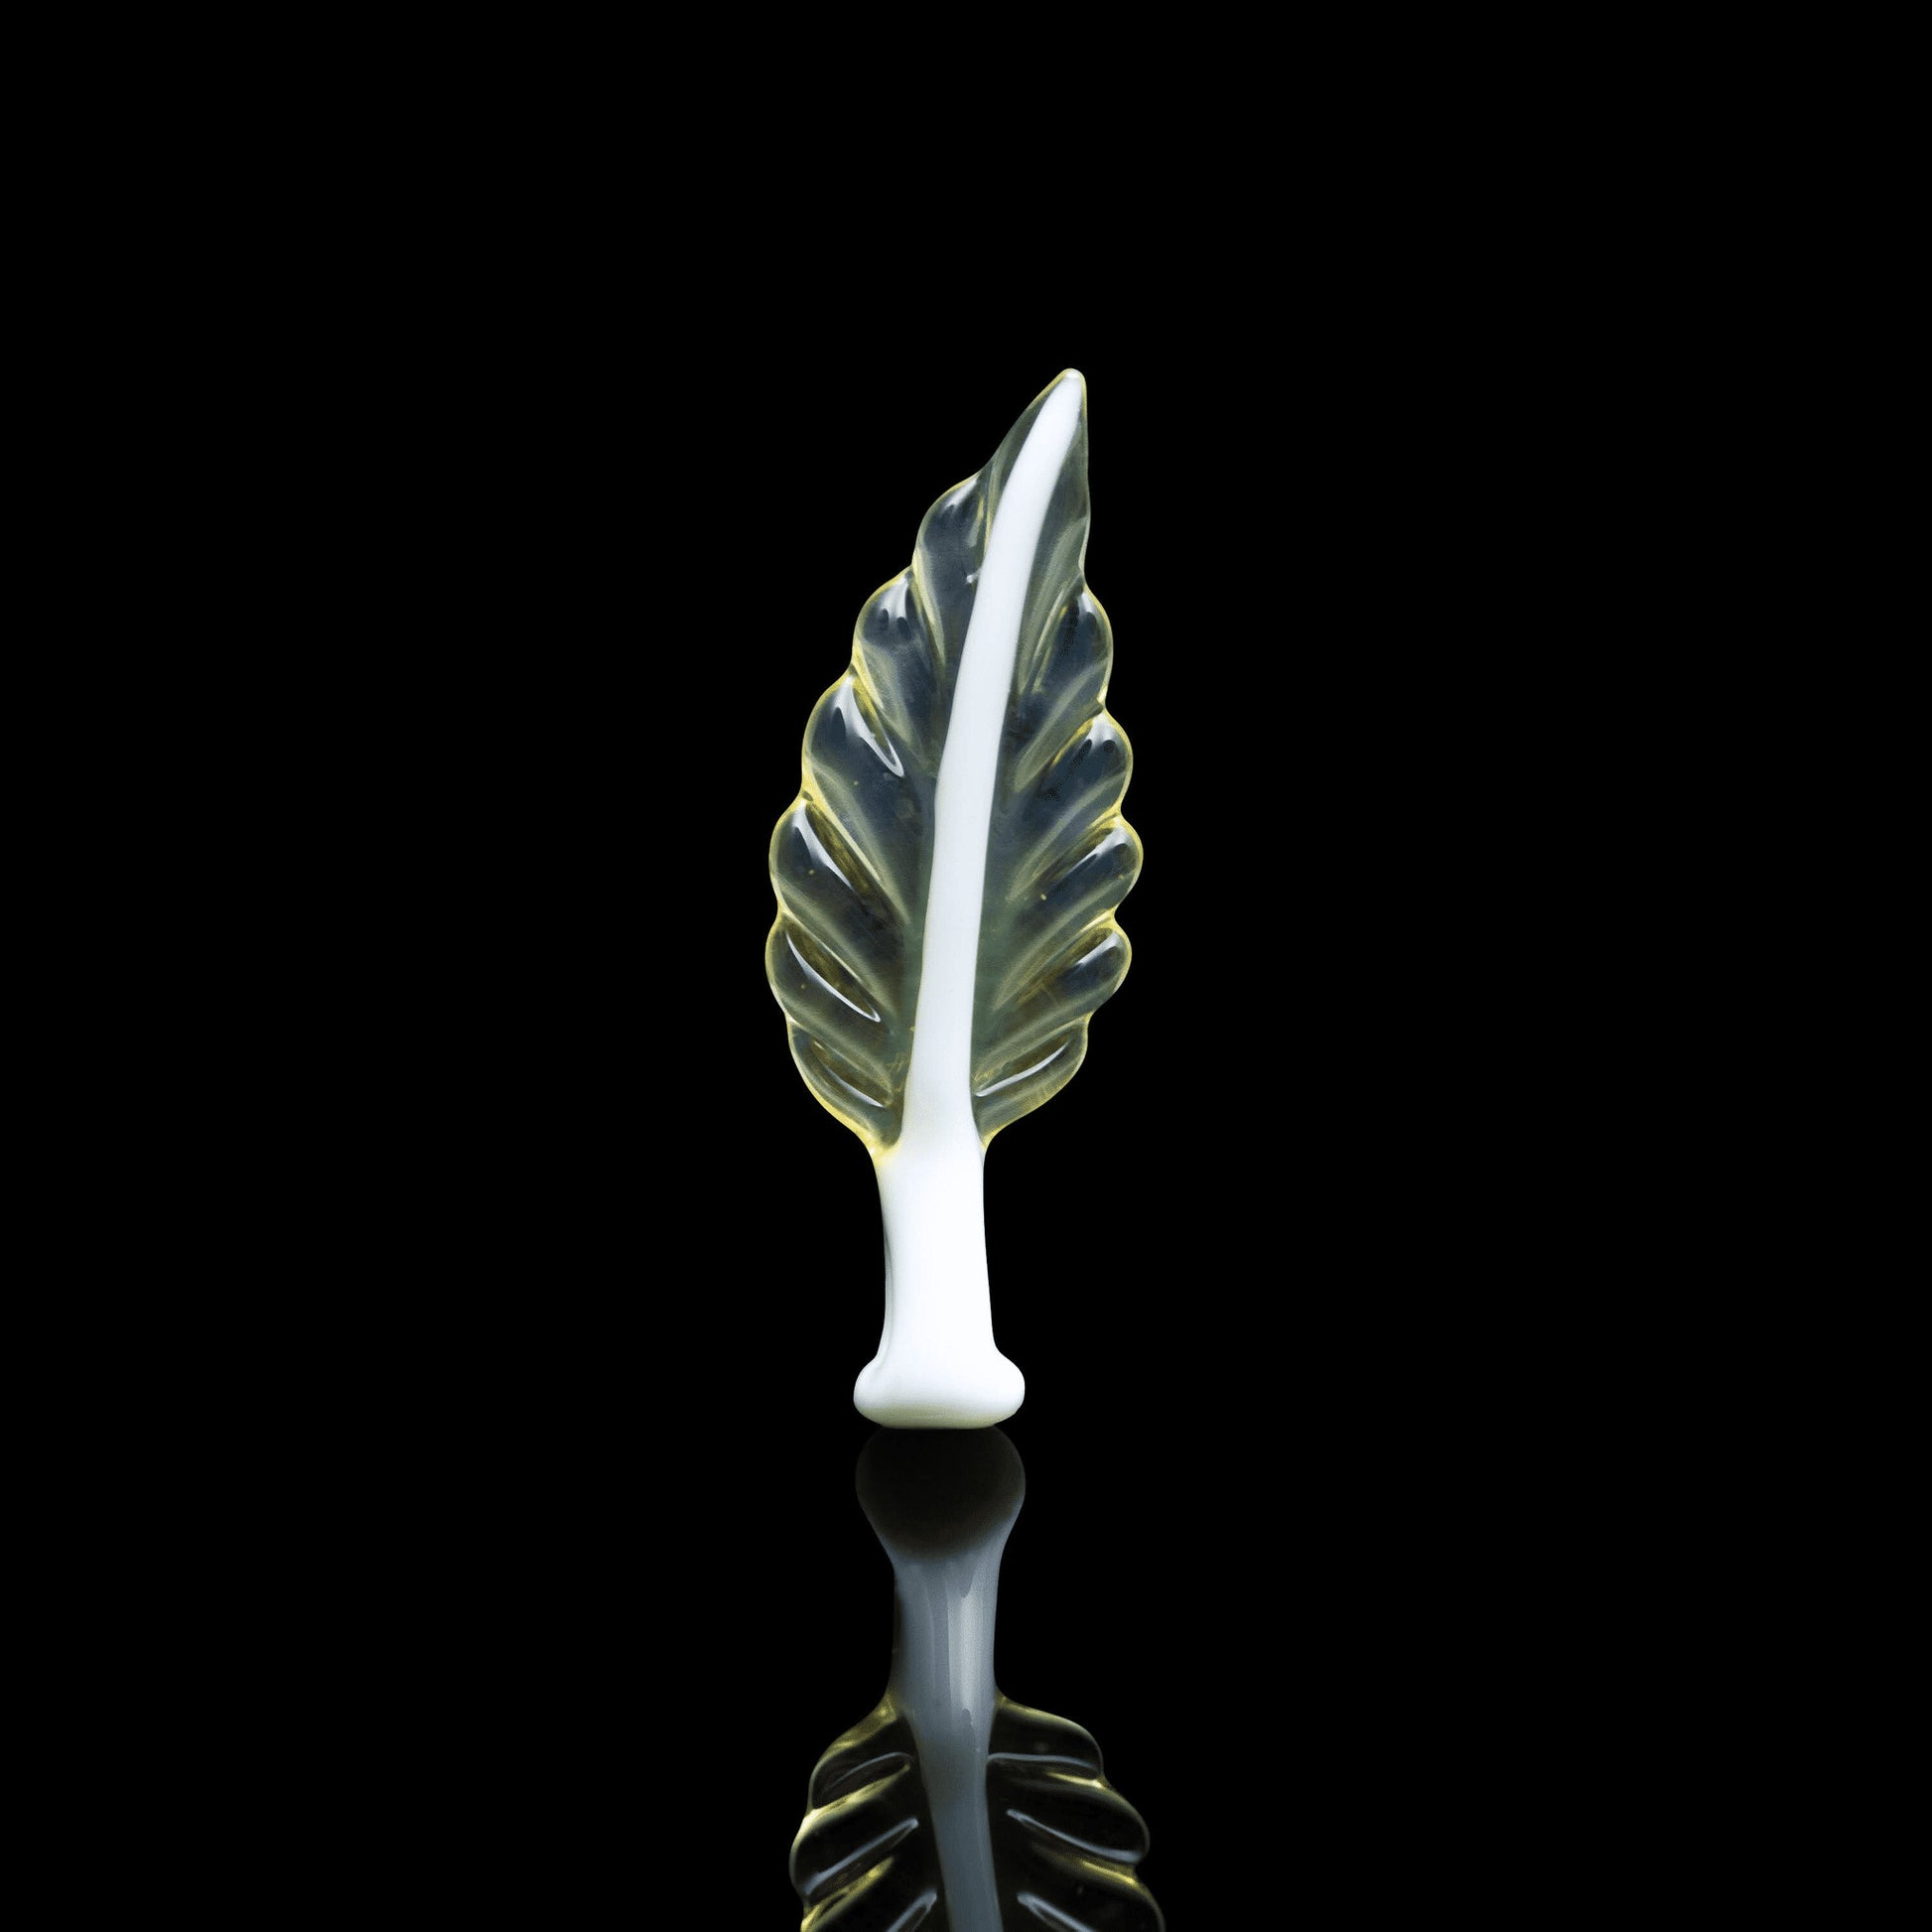 meticulously crafted glass pendant - Leaf Pendant (B) by Alex Ubatuba (2BA x Stylie 2022 Release)